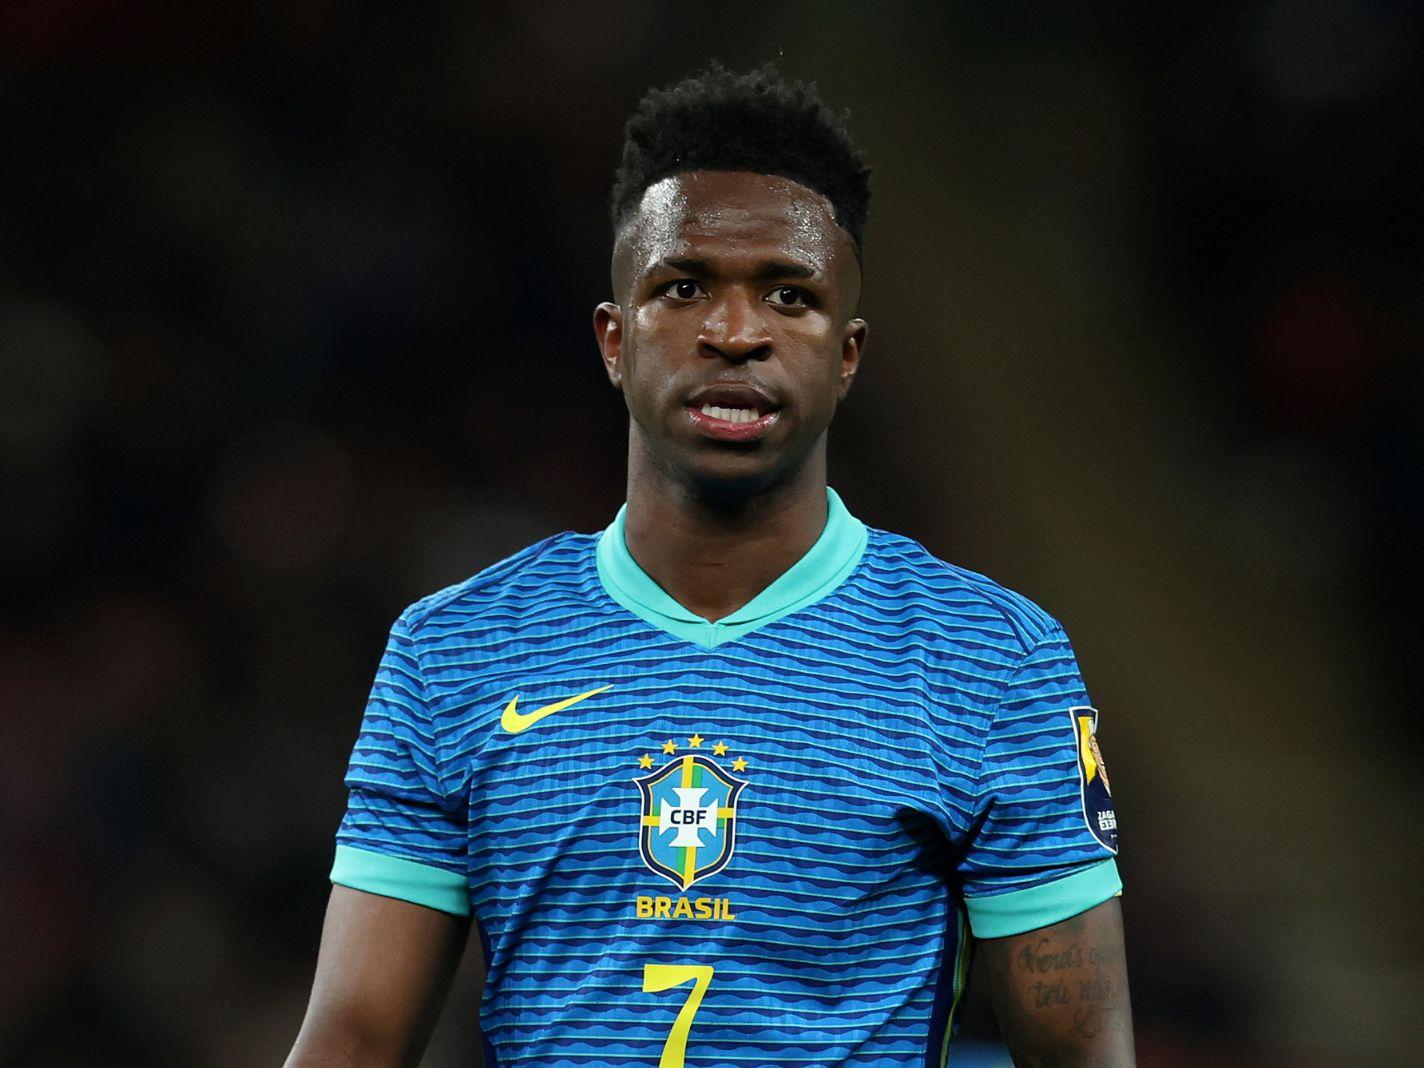 Can Vini lead Brazil without Neymar and Richarlson?